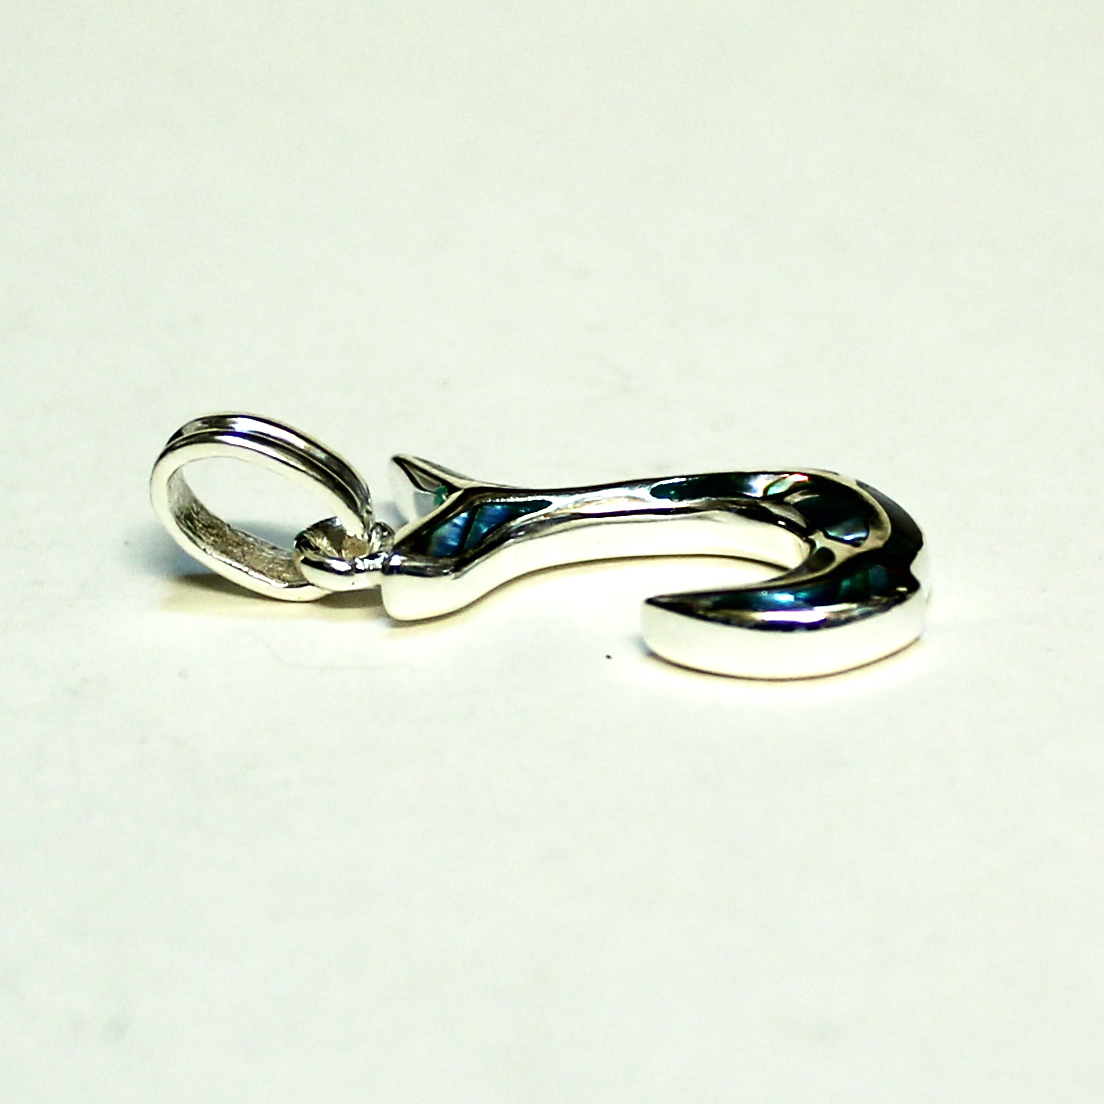 yStering Silver JewelryzVo[y_g s/s Fish Hook^nCAWG[^Vo[^Vo[lbNXEy_g